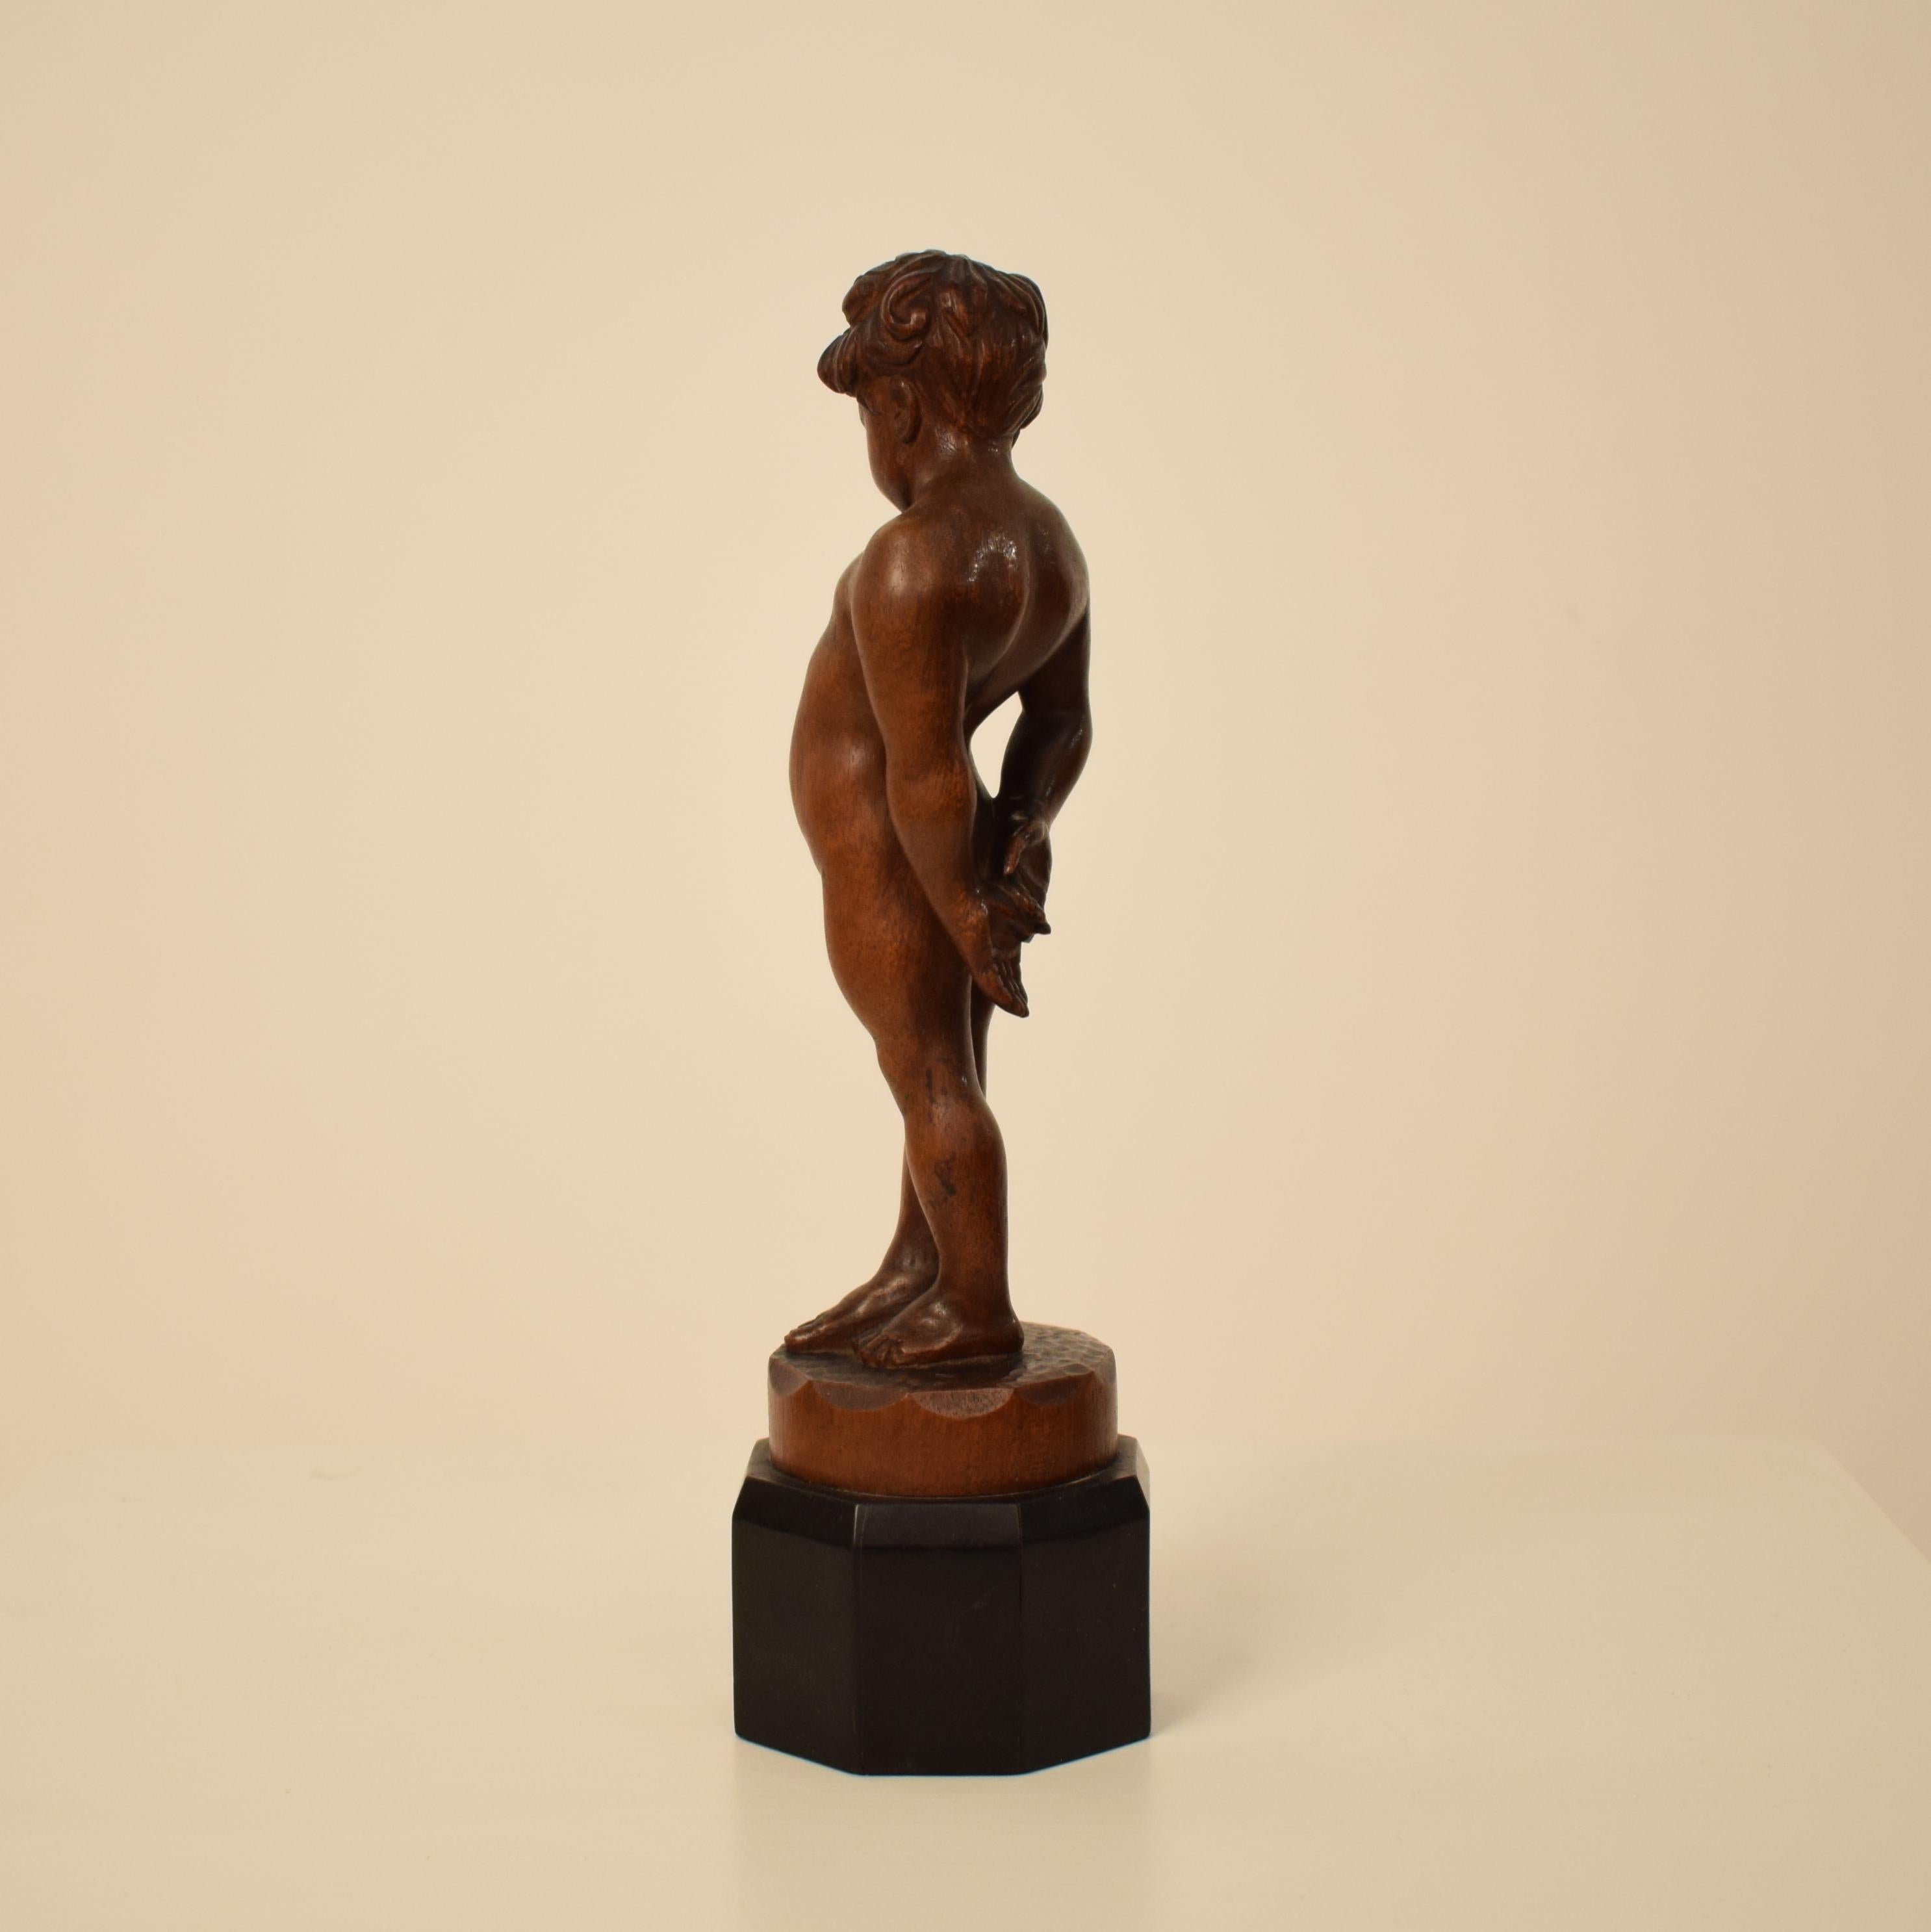 Early 20th Century German Art Deco Carved Wooden Walnut Sculpture of a Boy with Ebonized Base 1927